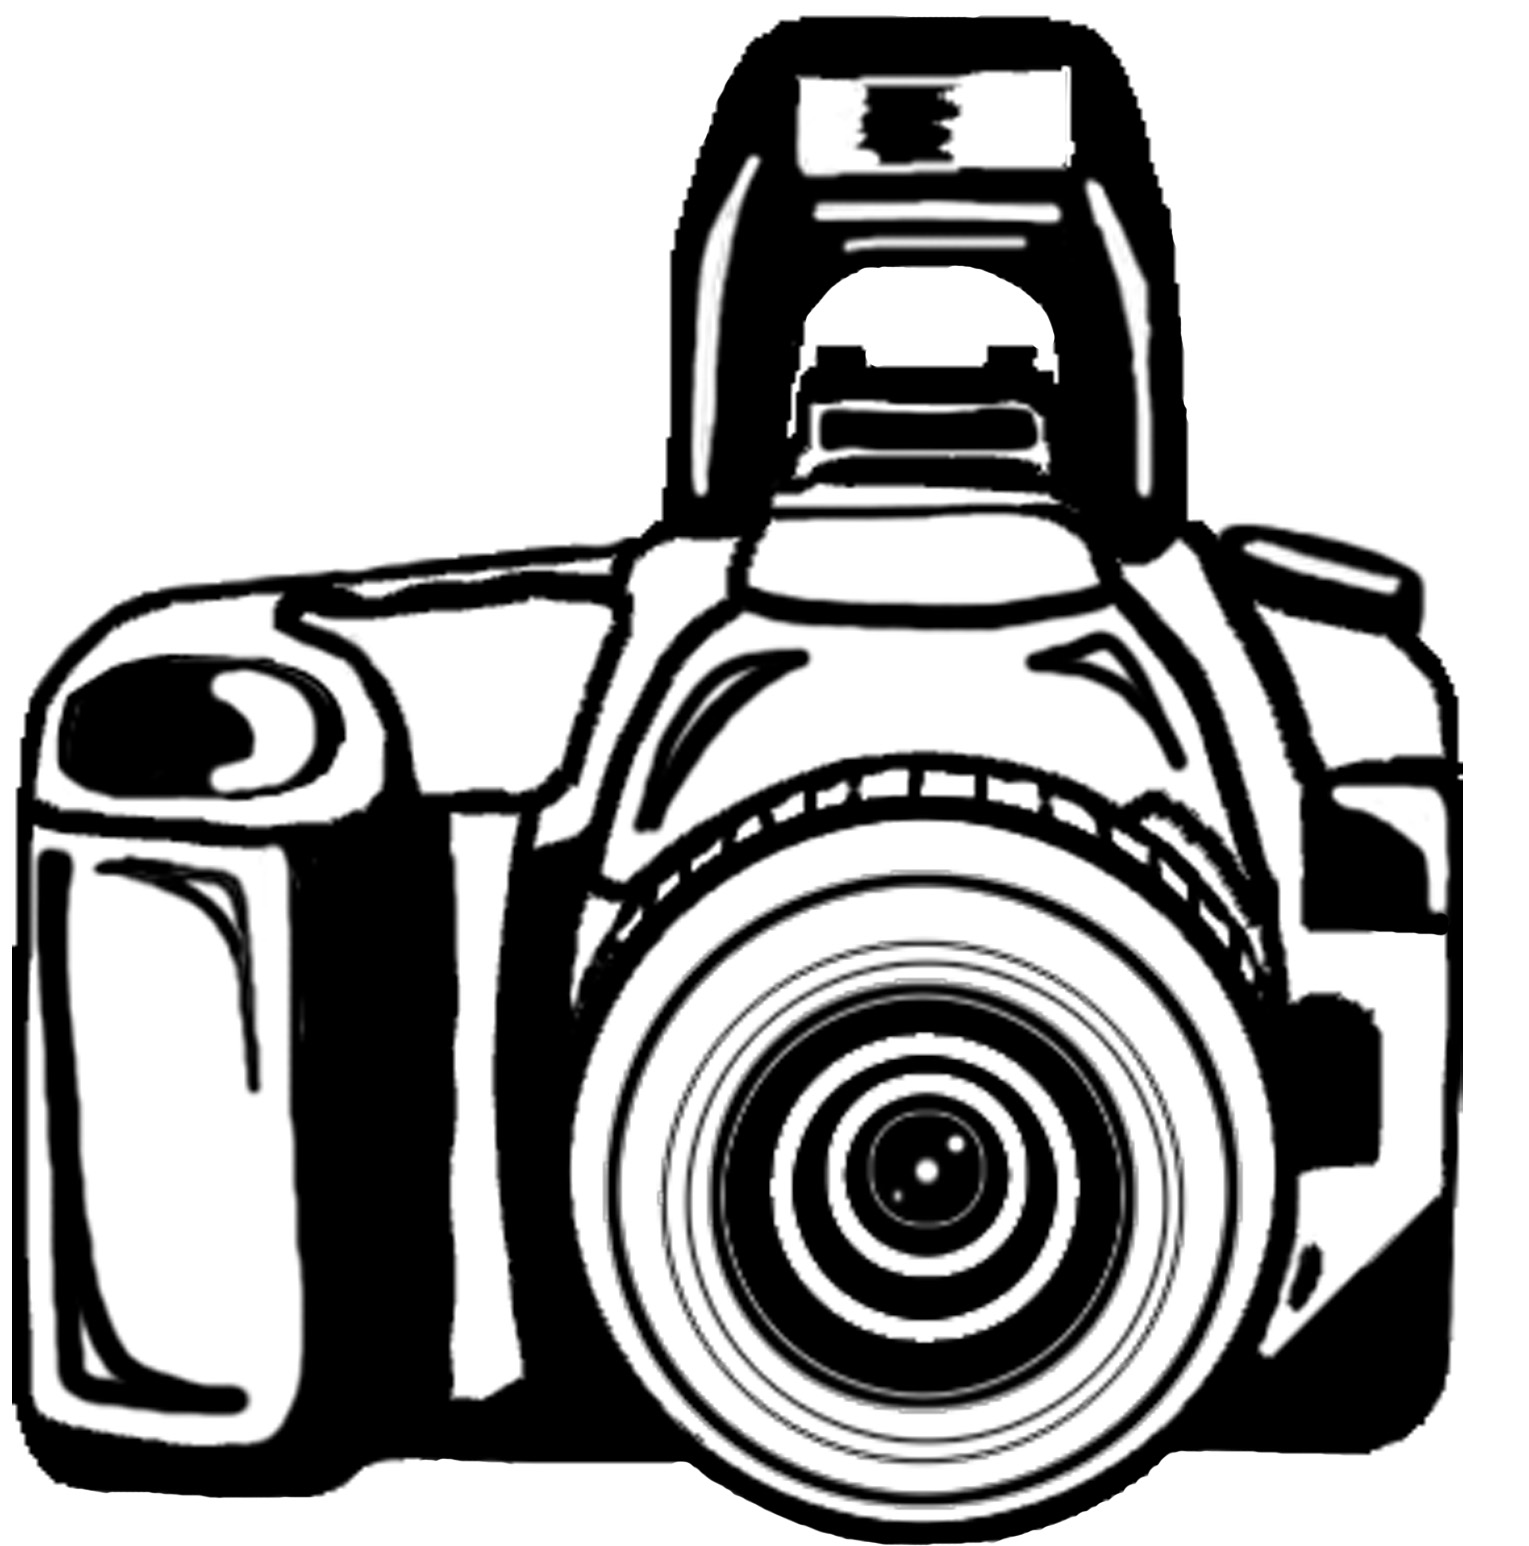 Digital Camera Clipart Black And White | Clipart library - Free 